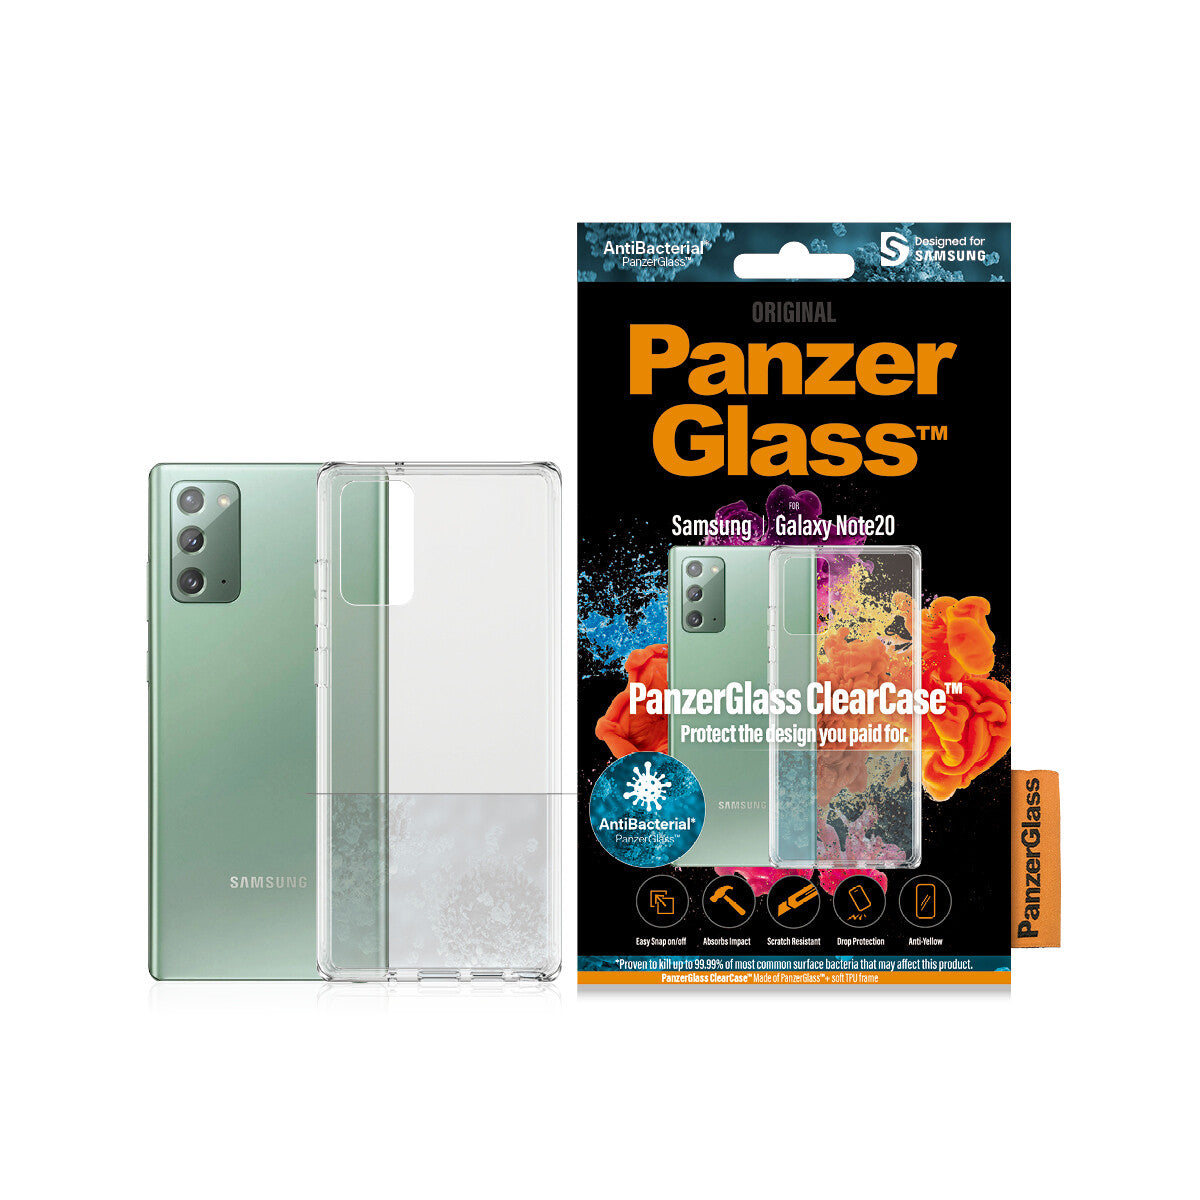 PanzerGlass ® ClearCase for Galaxy Note20 in Transparent